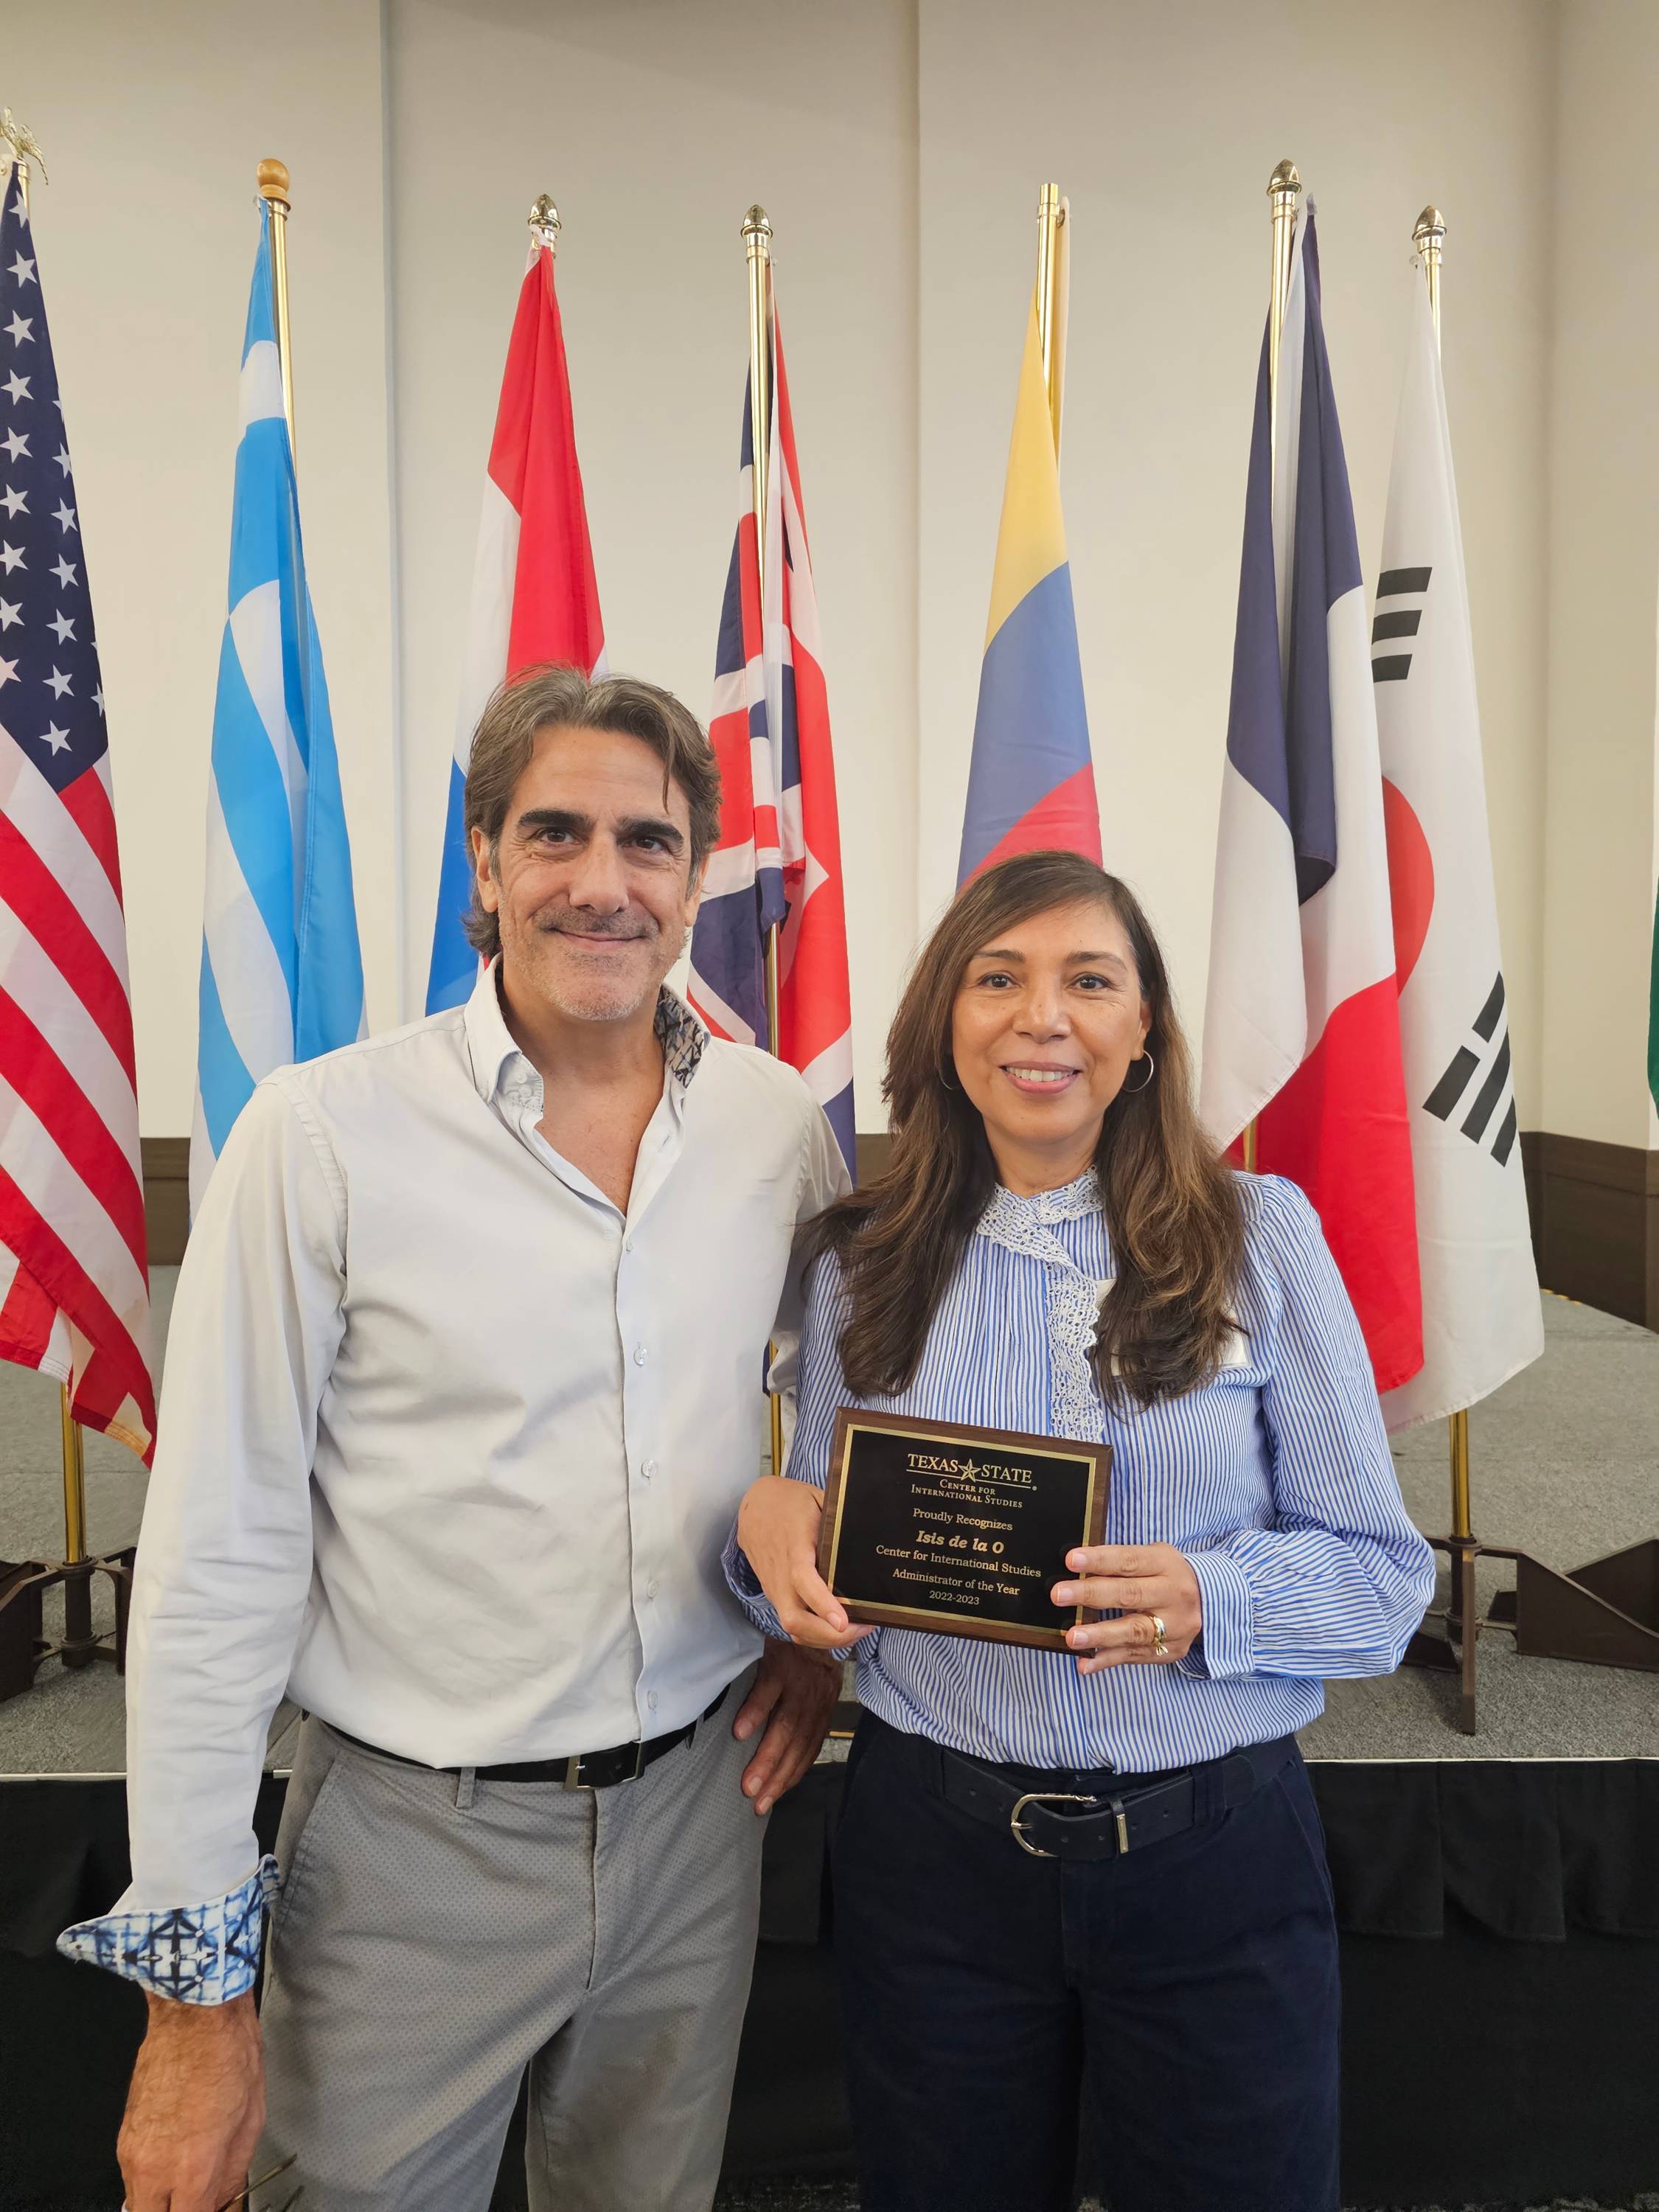 Dr. Paul Hart and Isis De La O stand in front of national flags with an award plaque